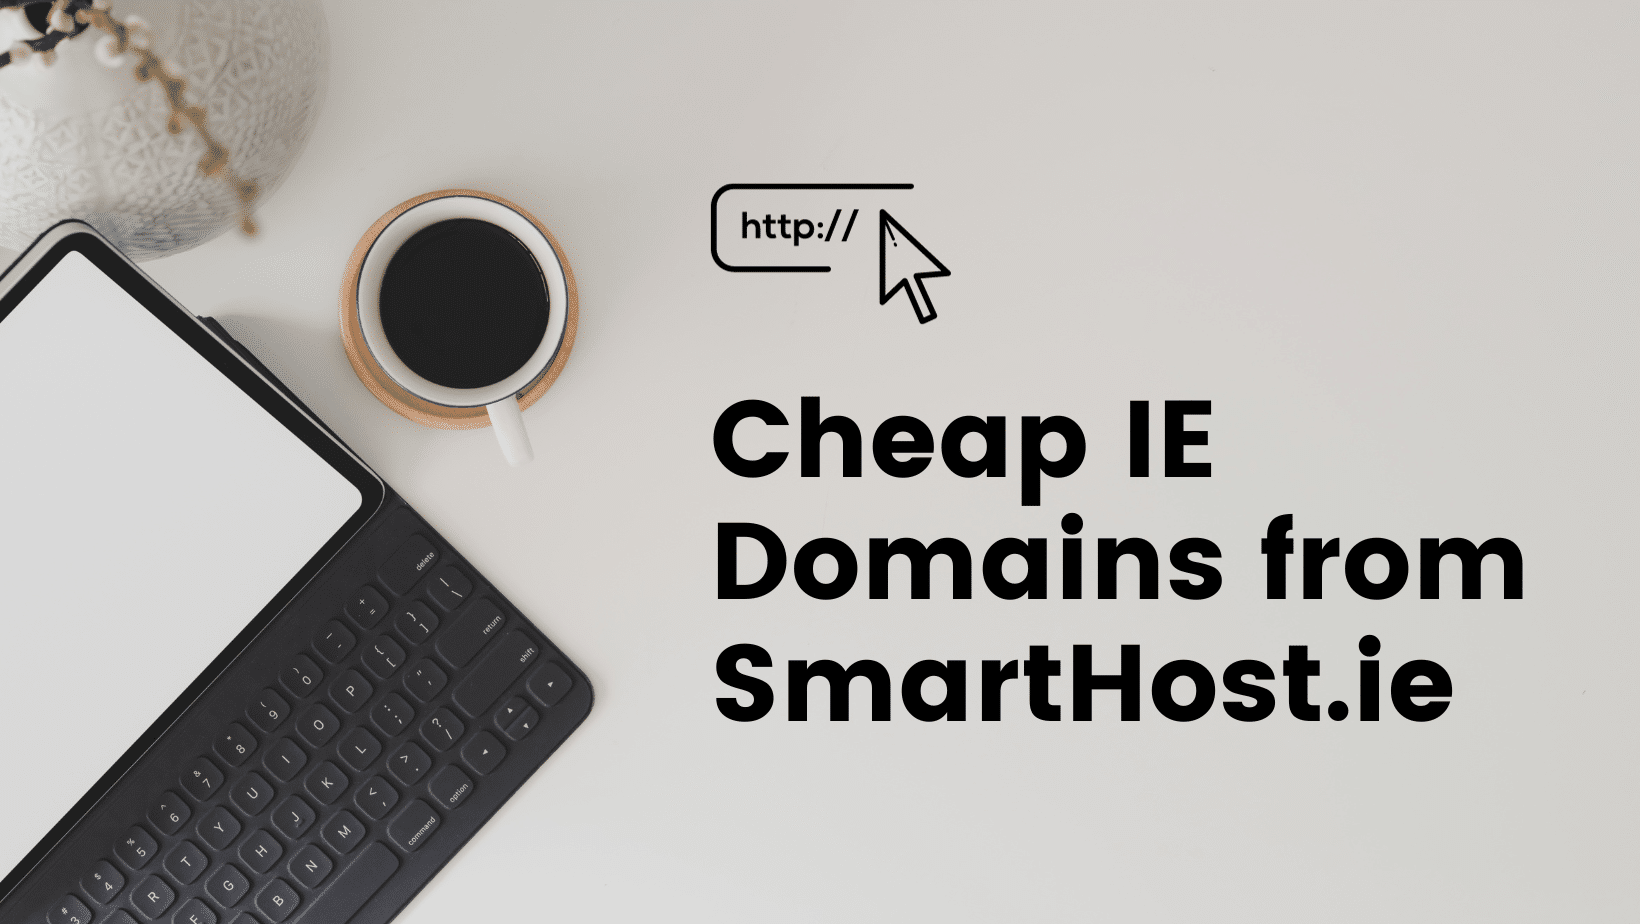 A person is purchasing a domain name from SmartHost.ie.